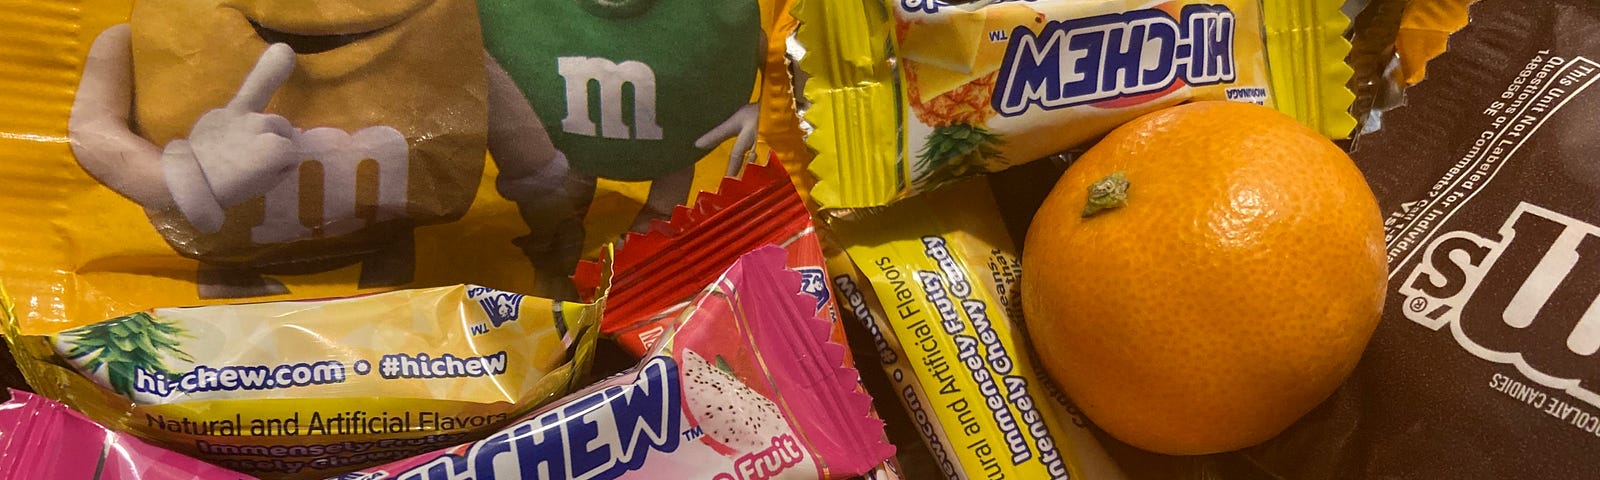 An assortment of fun-size original and peanut M&M’s in brown and yellow packets respectively, three Mandarin oranges, one pink Hi-Chew dragon fruit candy, and three yellow Hi-Chew pineapple candy.